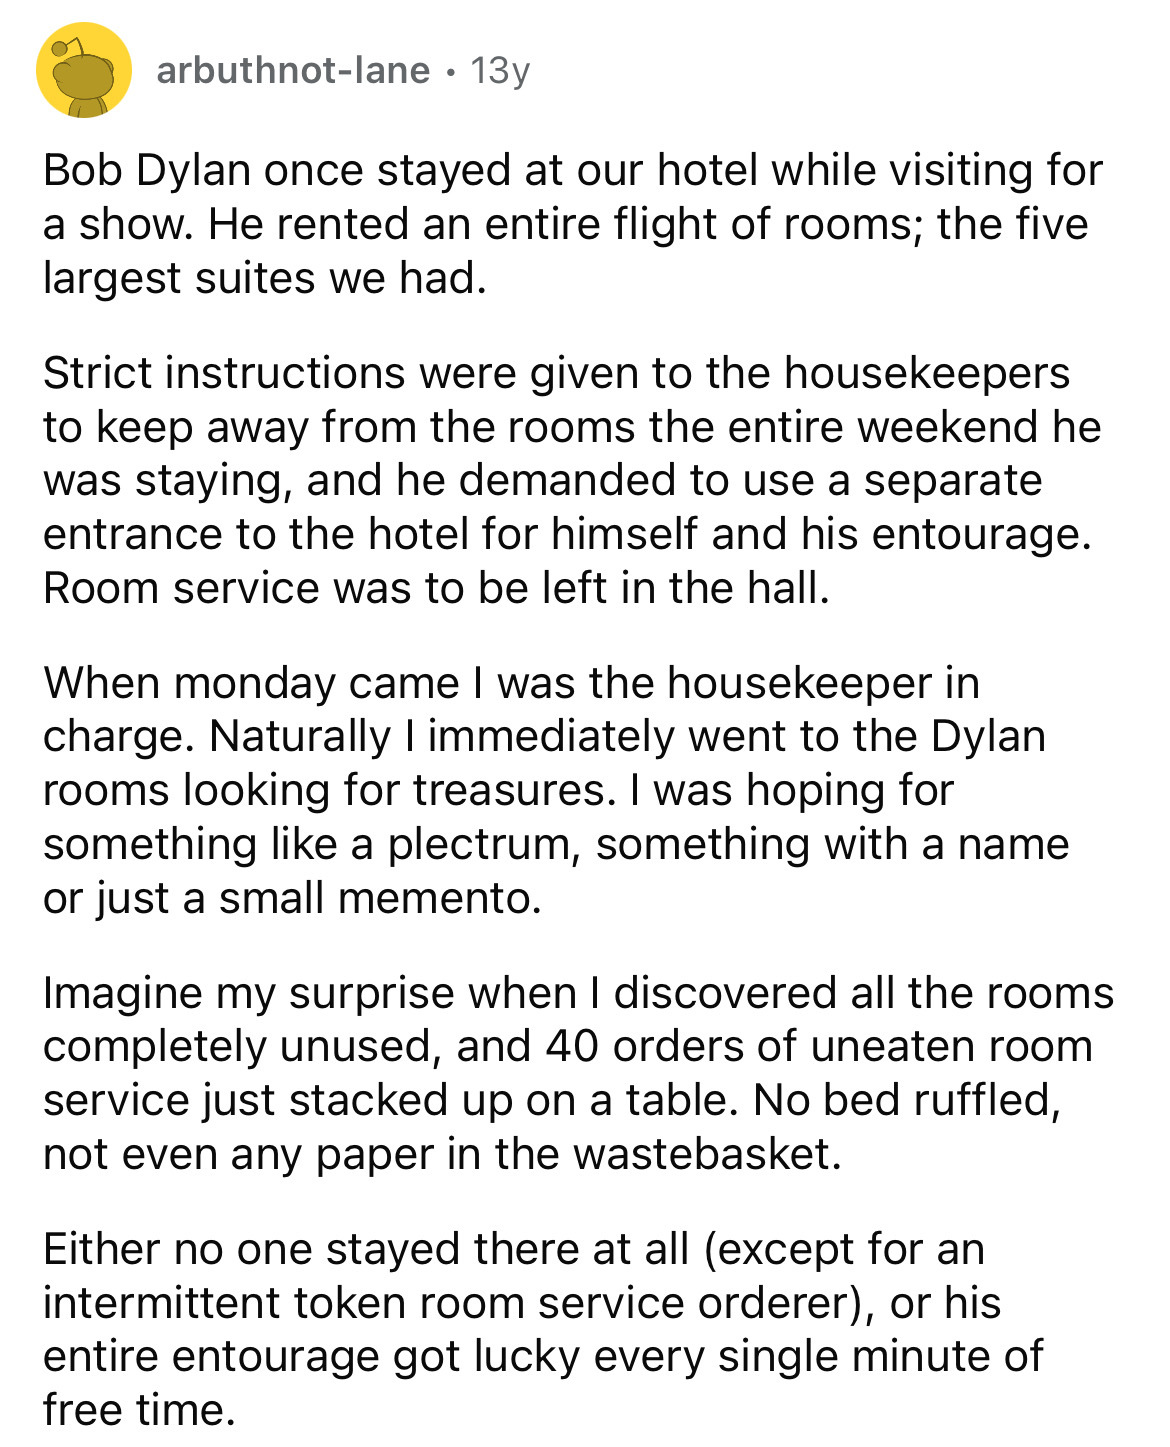 document - arbuthnotlane 13y Bob Dylan once stayed at our hotel while visiting for a show. He rented an entire flight of rooms; the five largest suites we had. Strict instructions were given to the housekeepers to keep away from the rooms the entire weeke